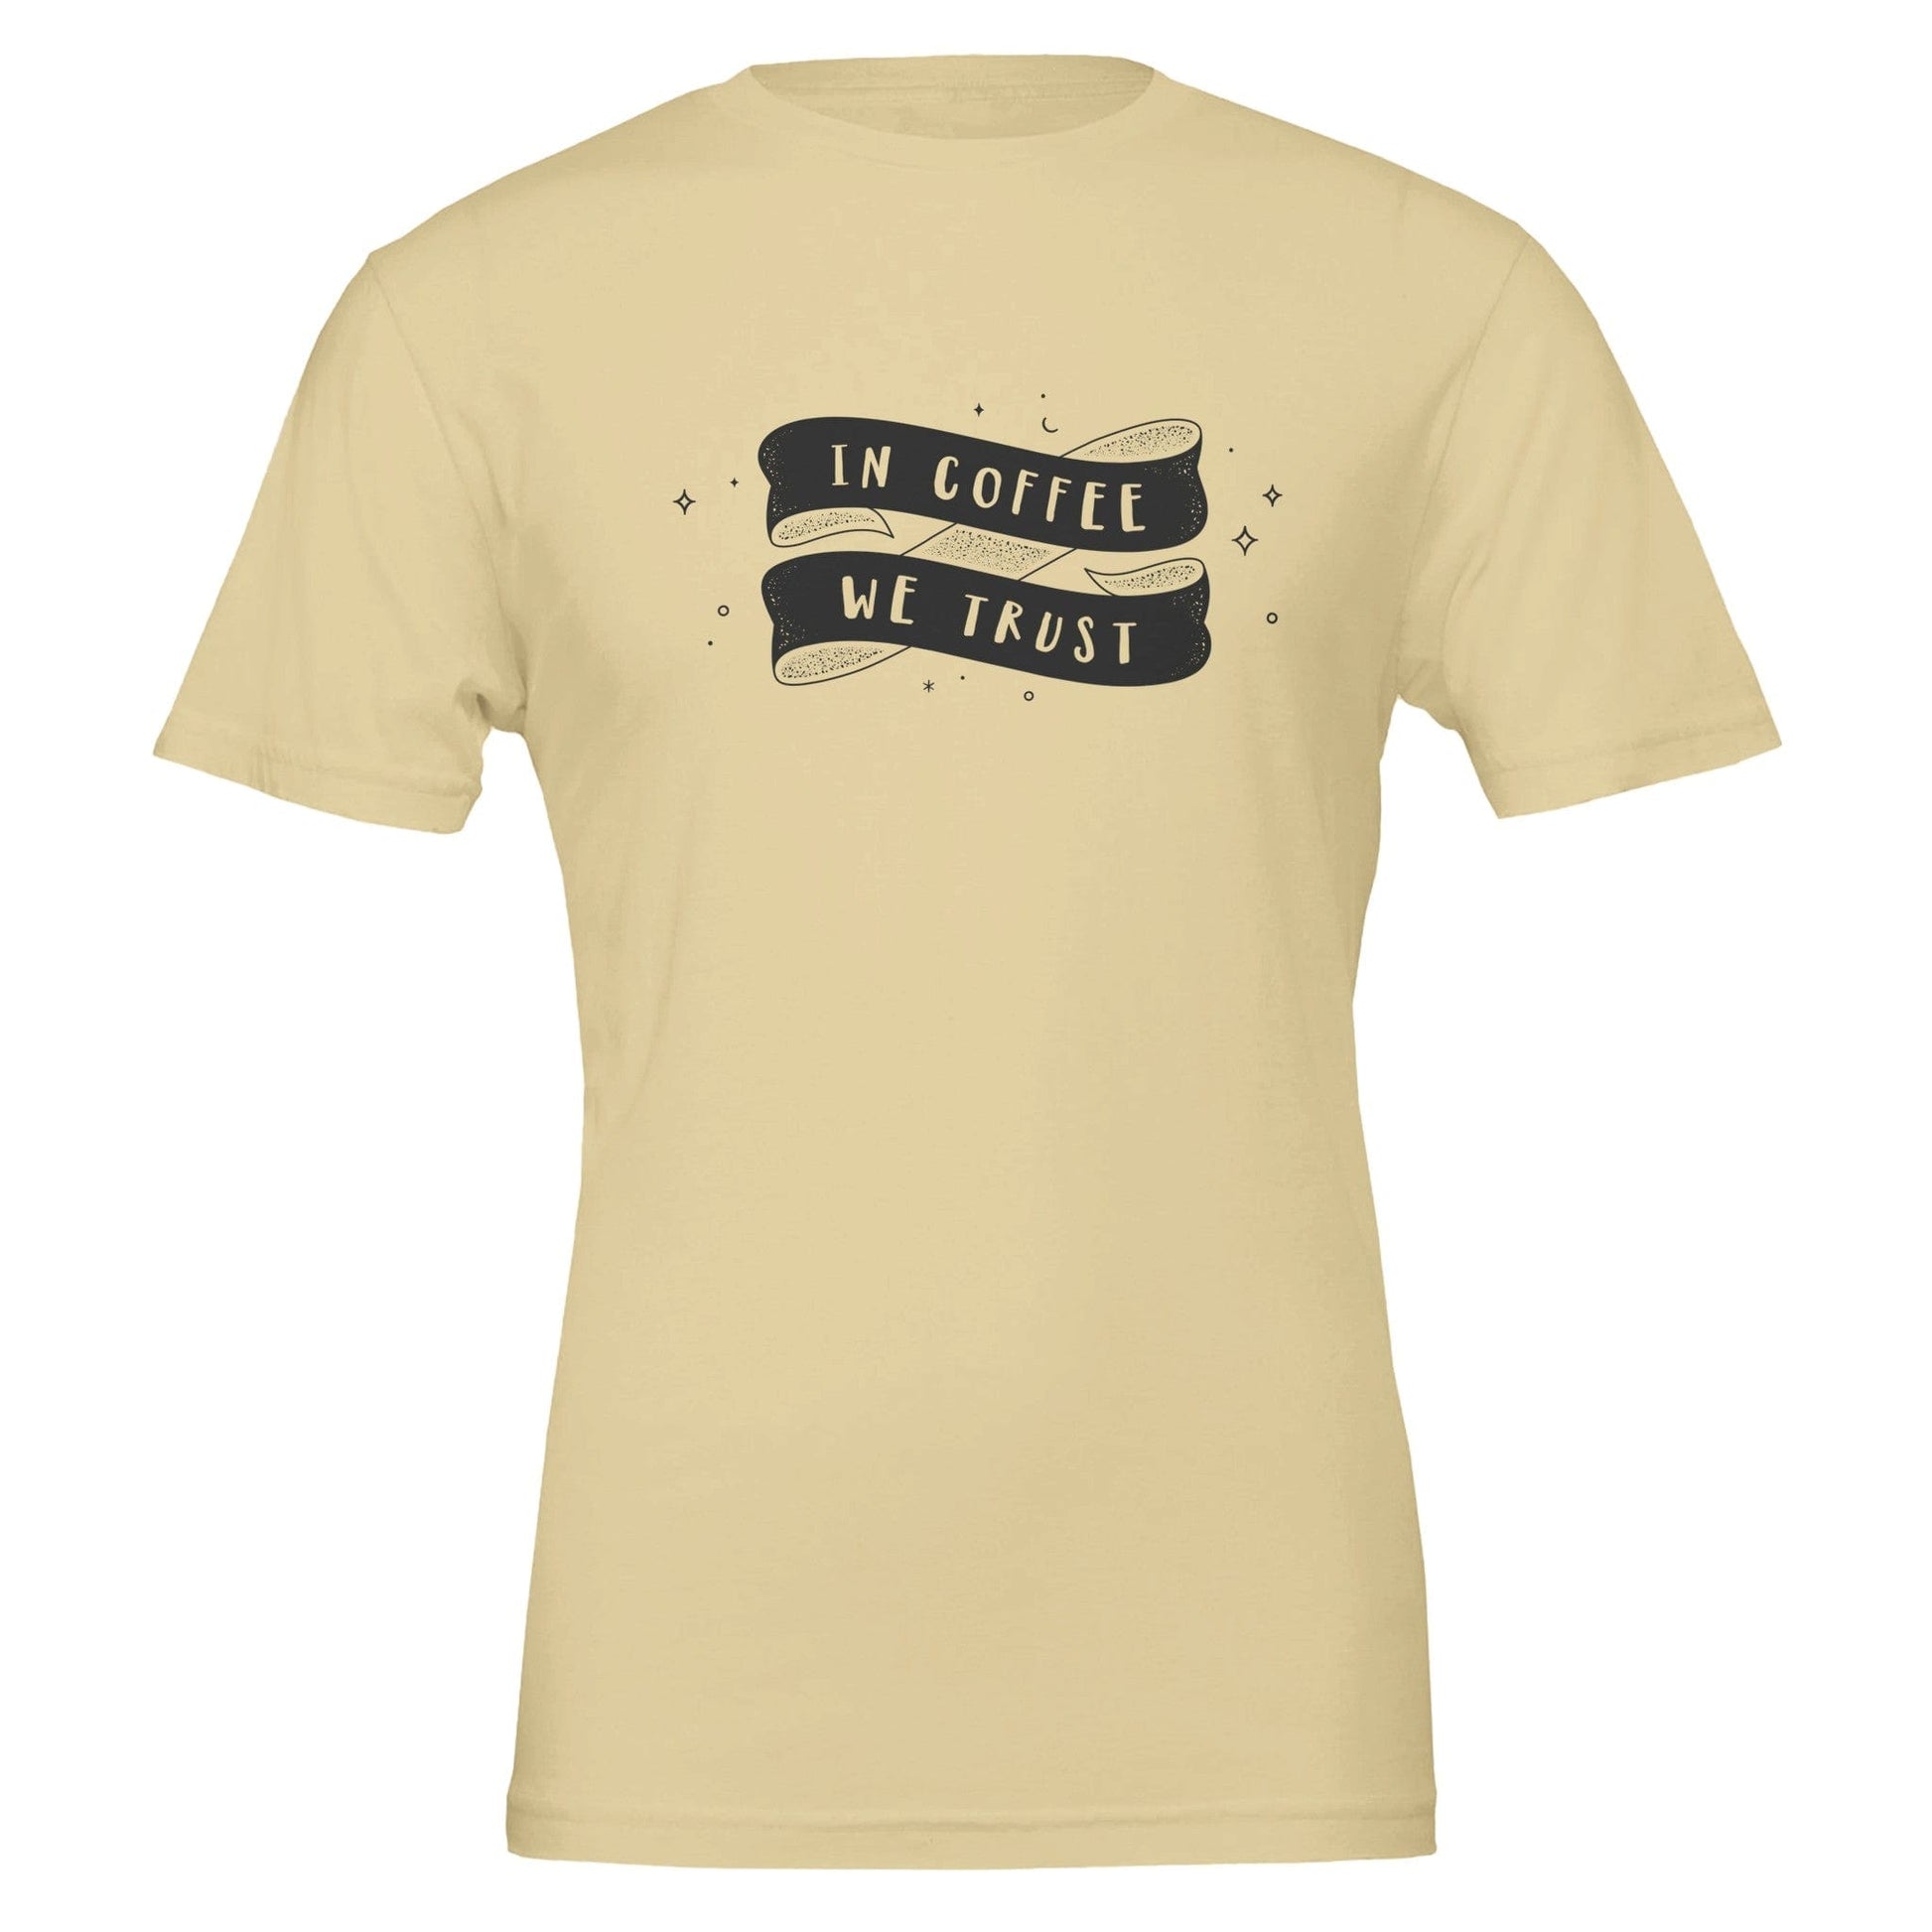 Good Bean Gifts "In Coffee We Trust" Unisex Crewneck T-shirt | Bella + Canvas 3001 Natural / S